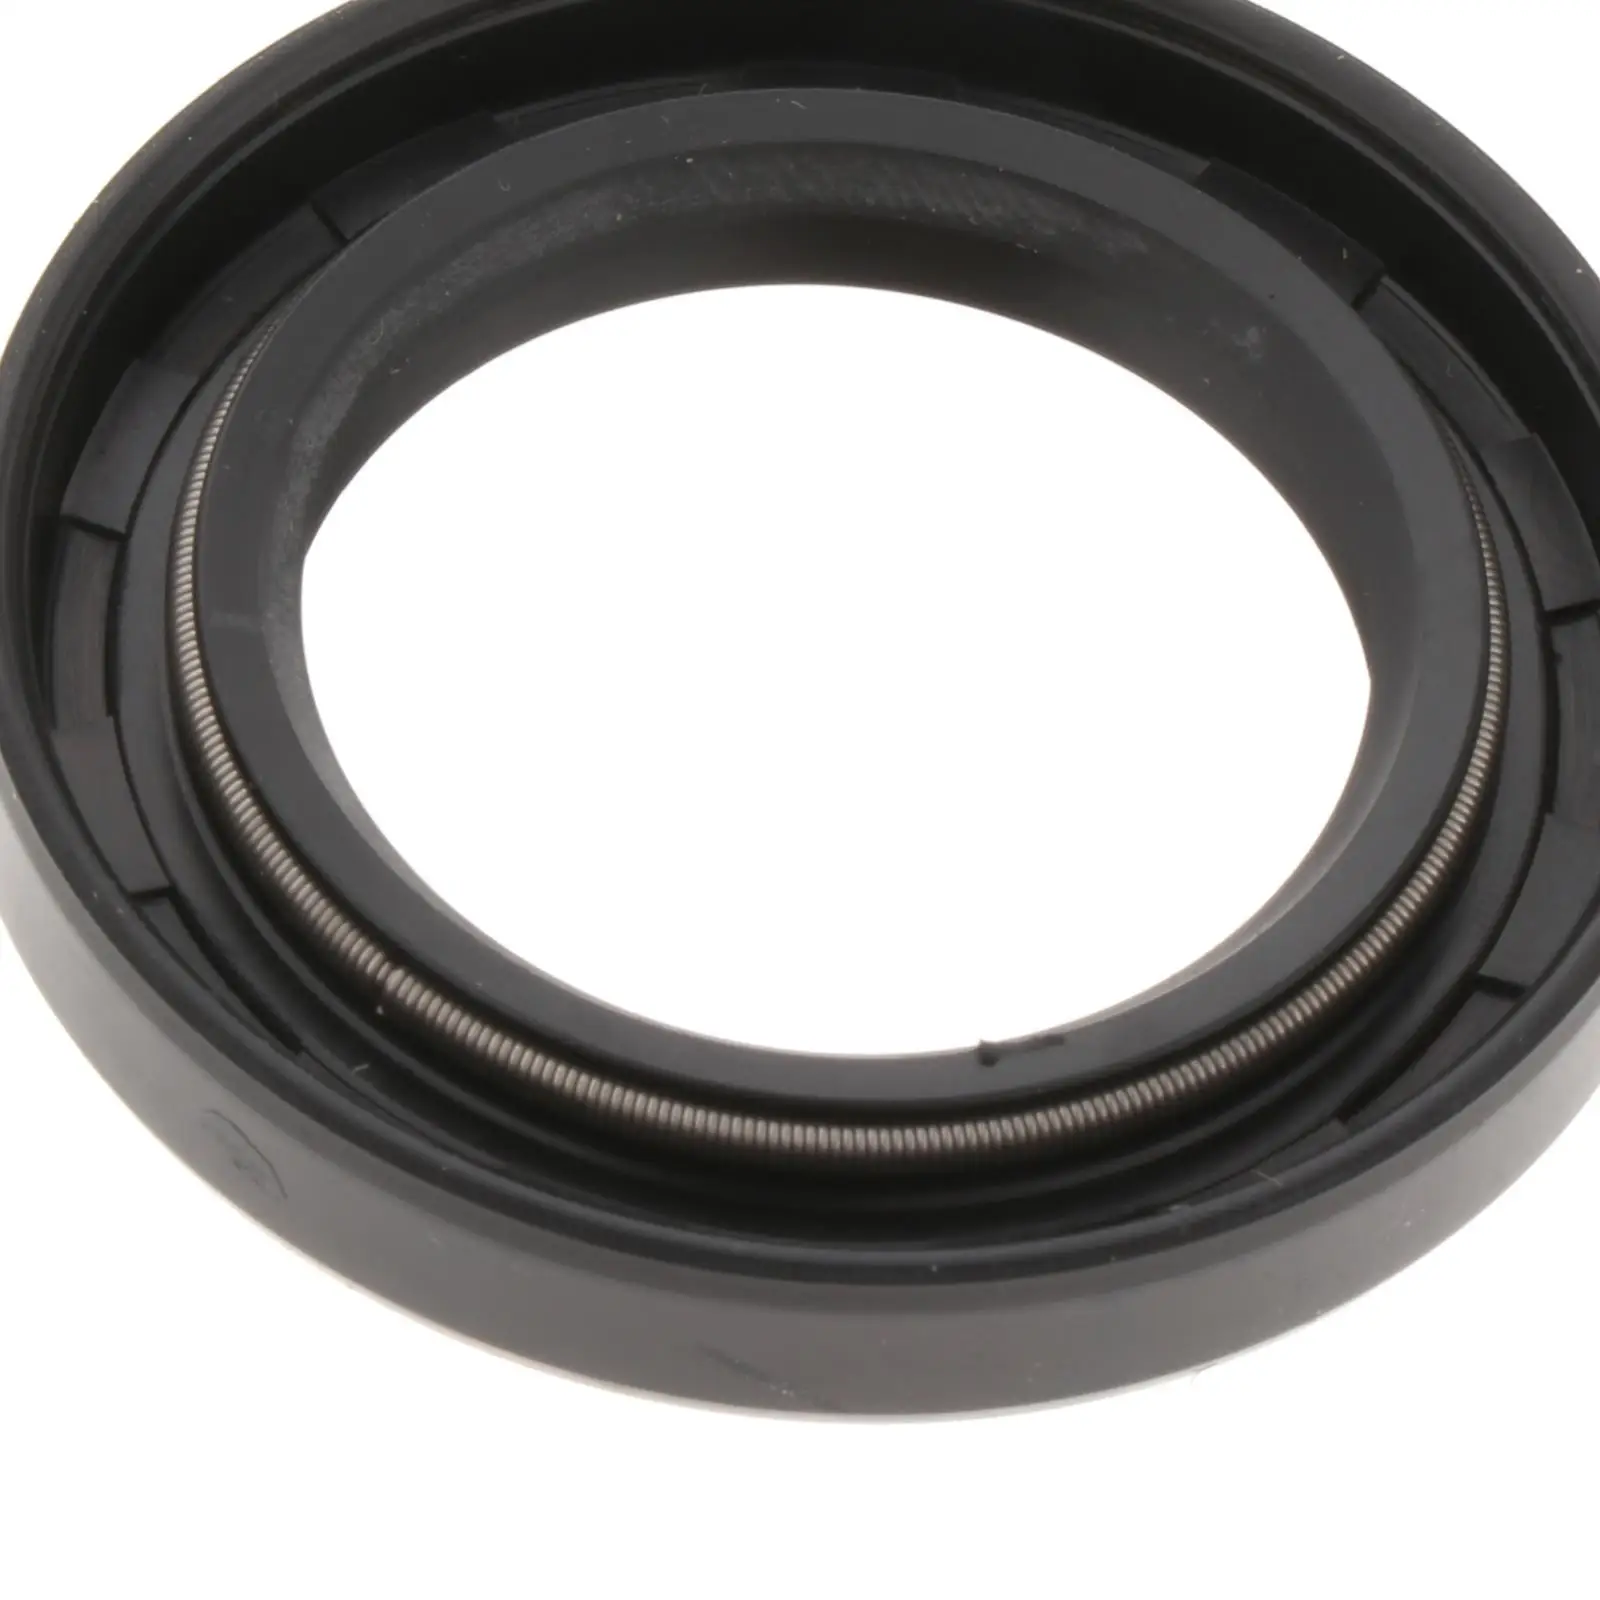 Oil Seal 93102-30M23 Fit for Yamaha Outboard Motor 2T 60HP-90HP Accessories